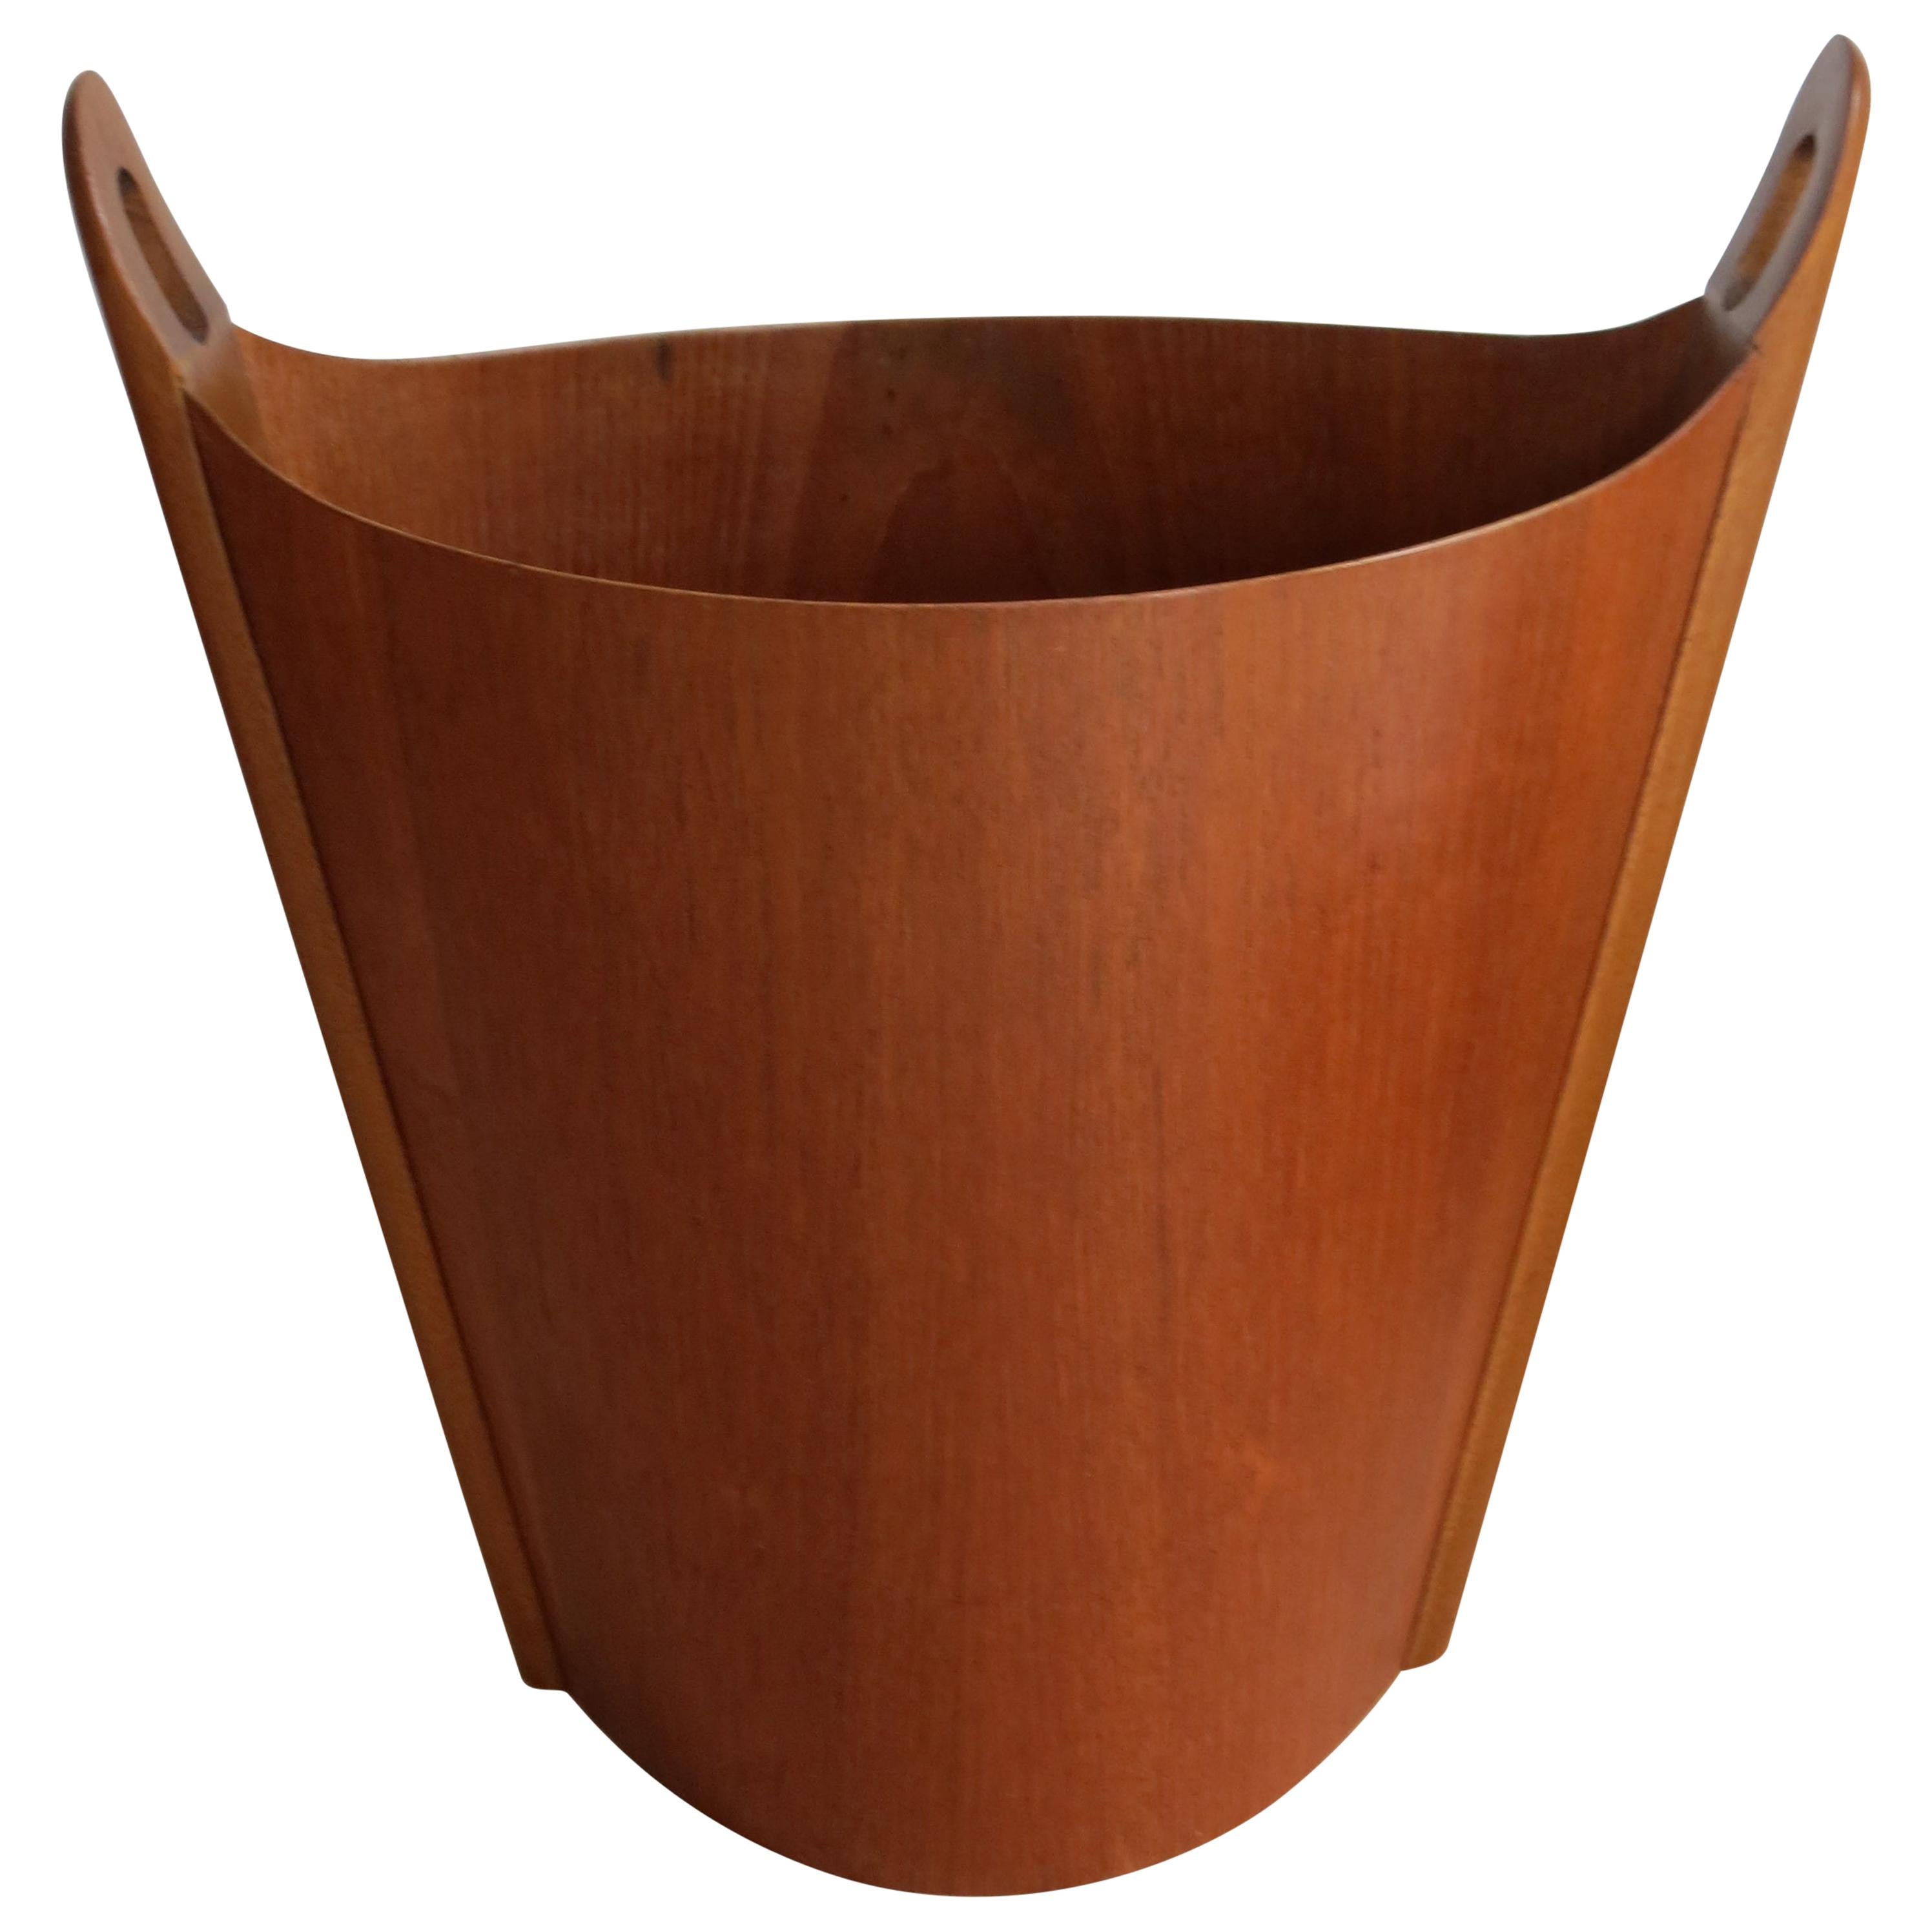 Teak waste paper basket from the 1950s, manufactured by PS Heggen Norway, designed by Einar Barnes.
Made from teak. In good overall condition.
Stamped to underside P S Heggen Nordfjordeid made in Norway.
  